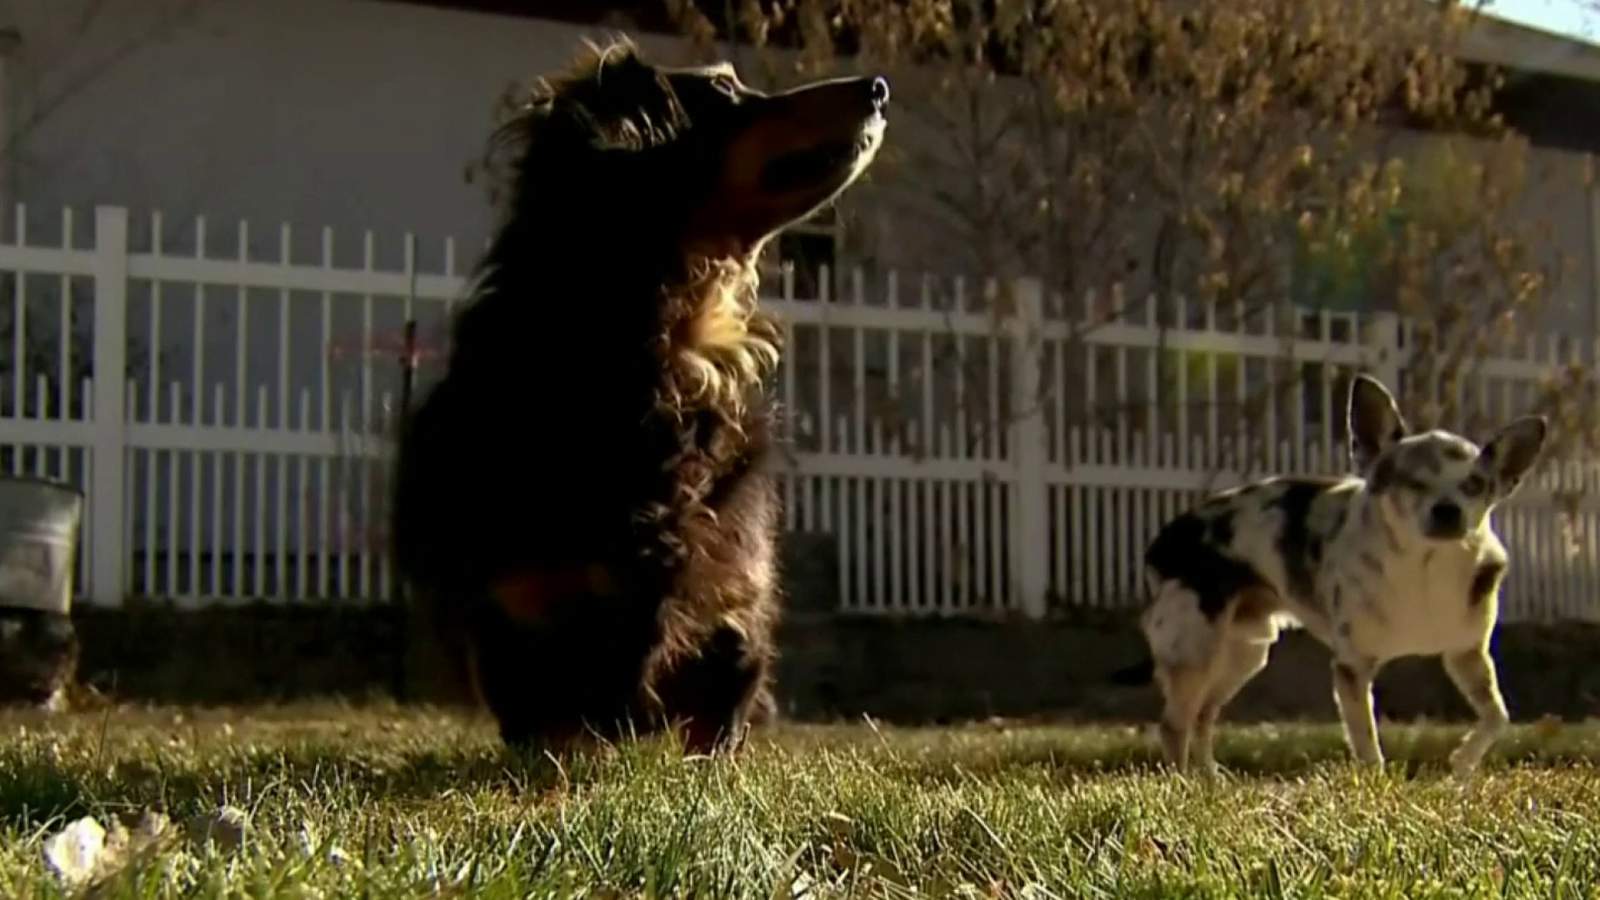 Good dog -- Dachshund saves chihuahua mix from mountain lion